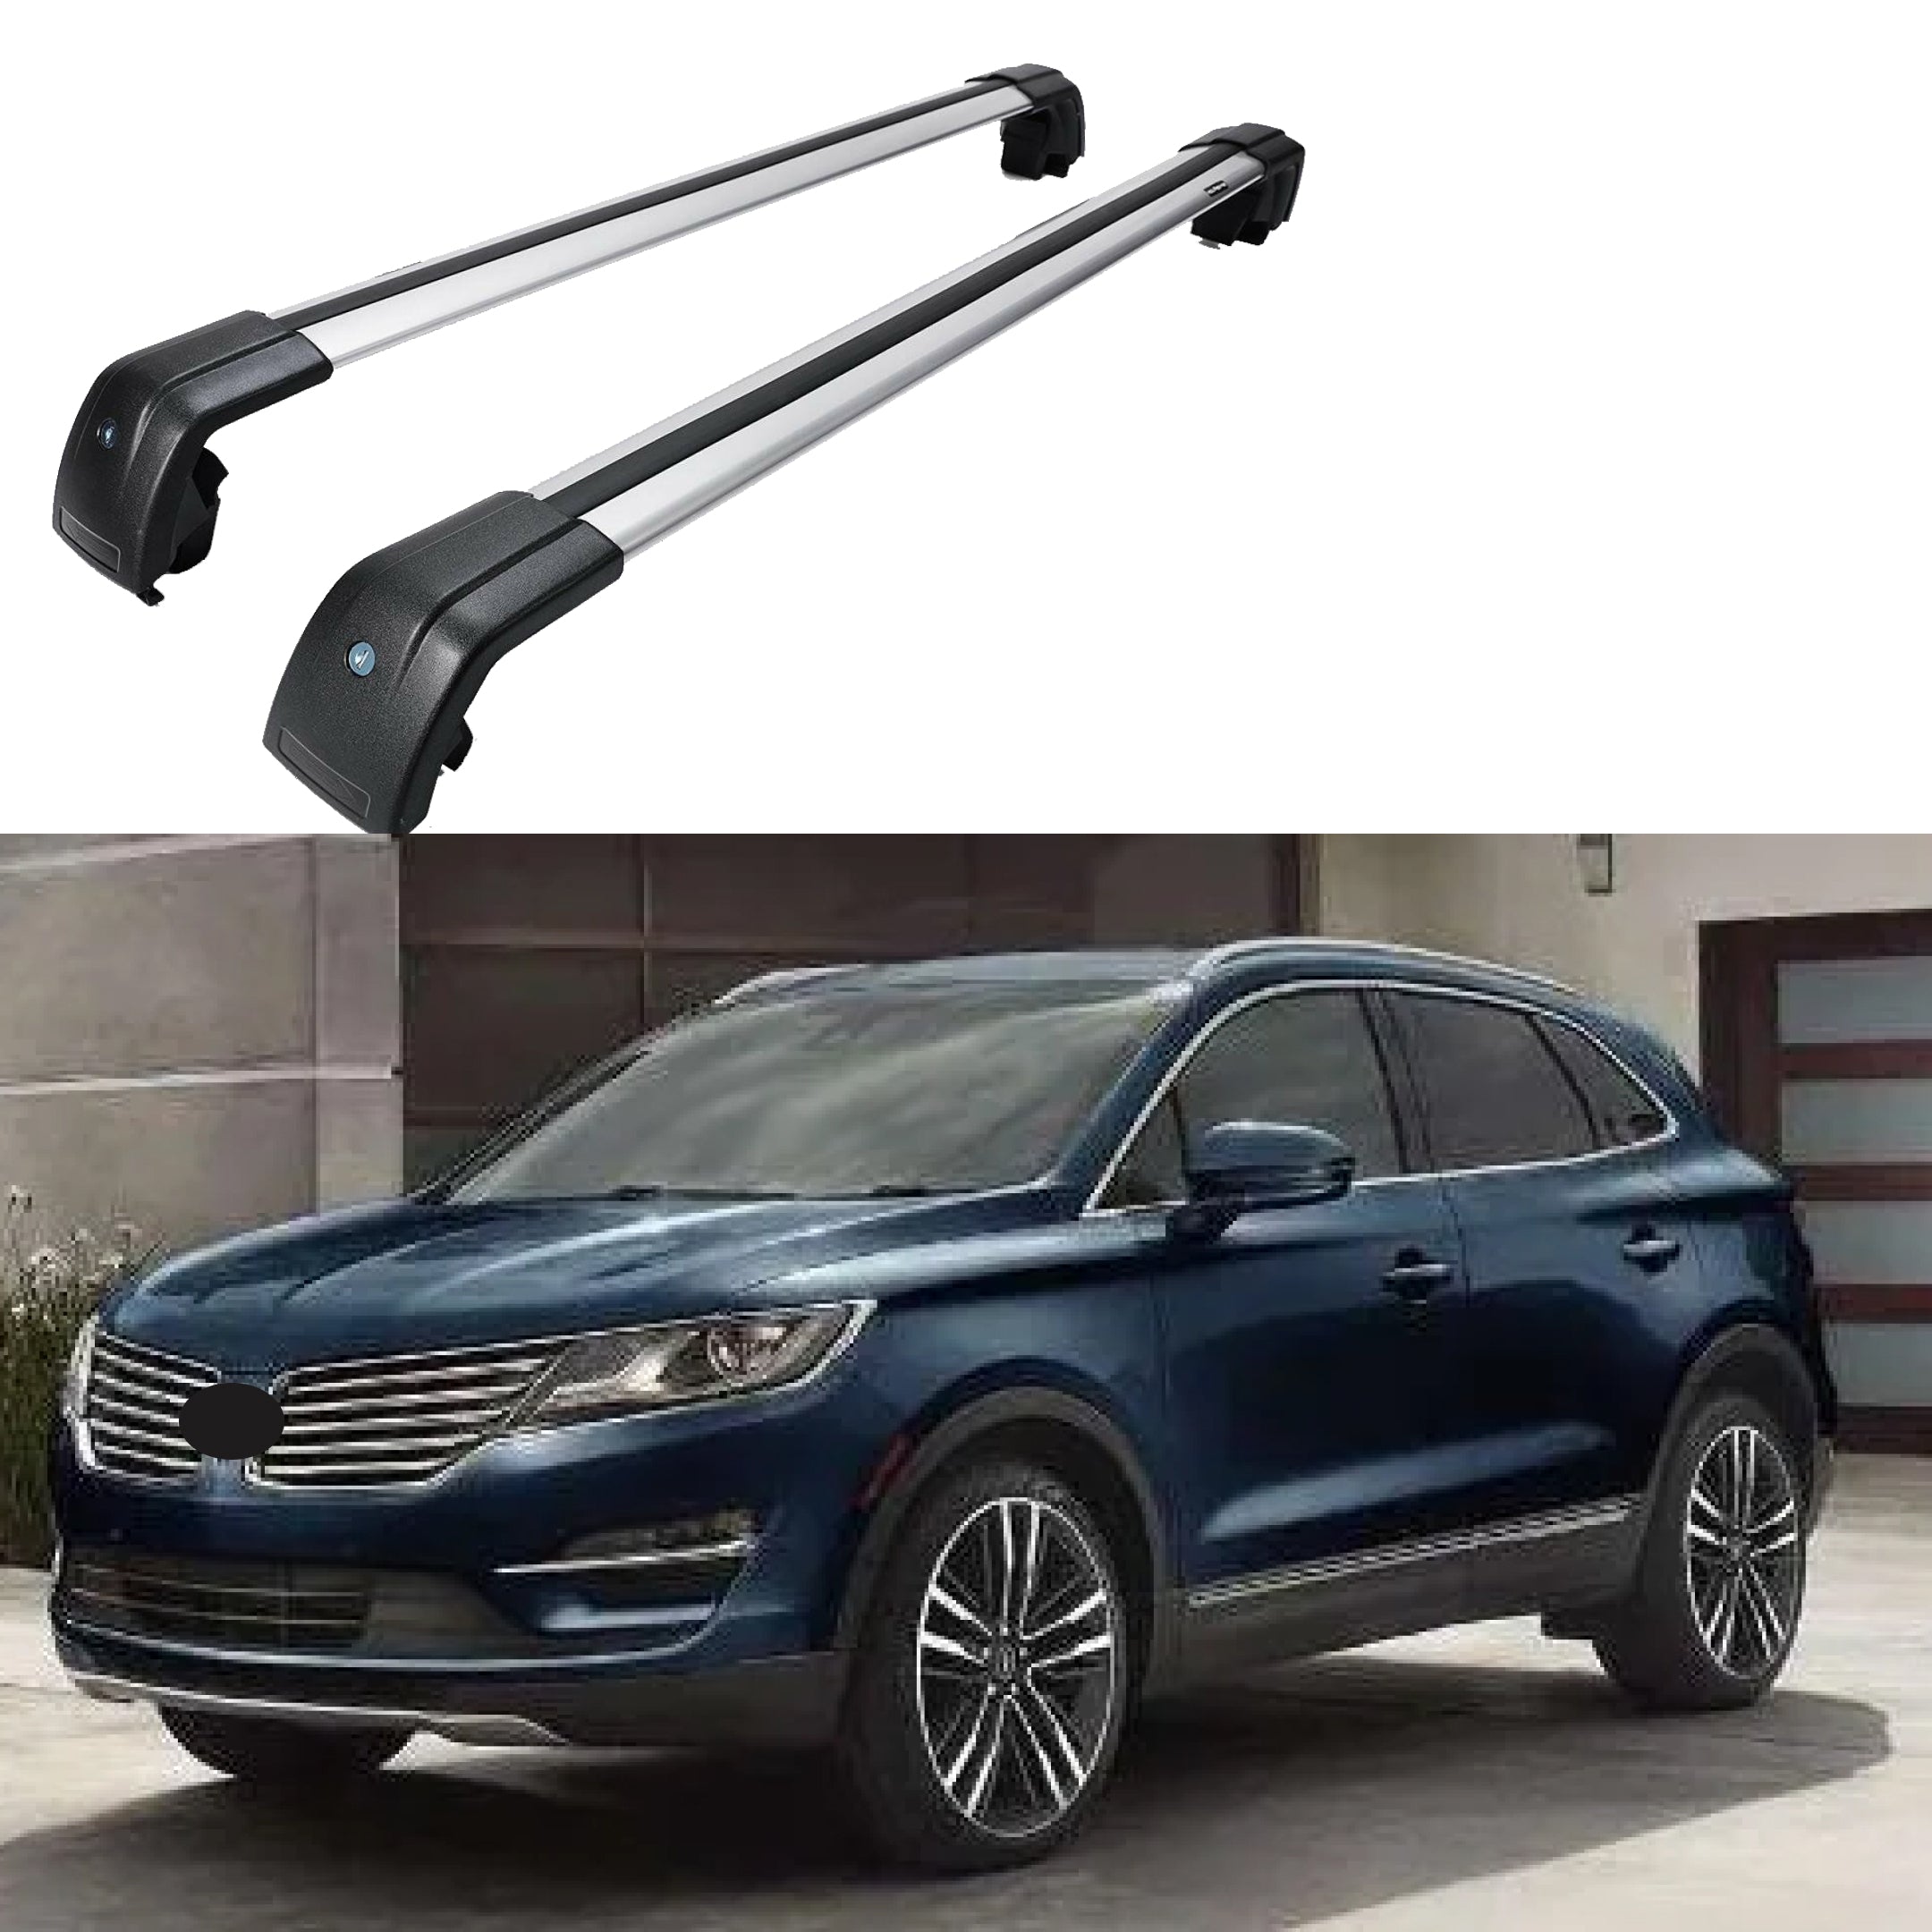 Fit 2013-2020 Lincoln MKC Roof Rack Cross Bar Crossbar Luggage Carrier